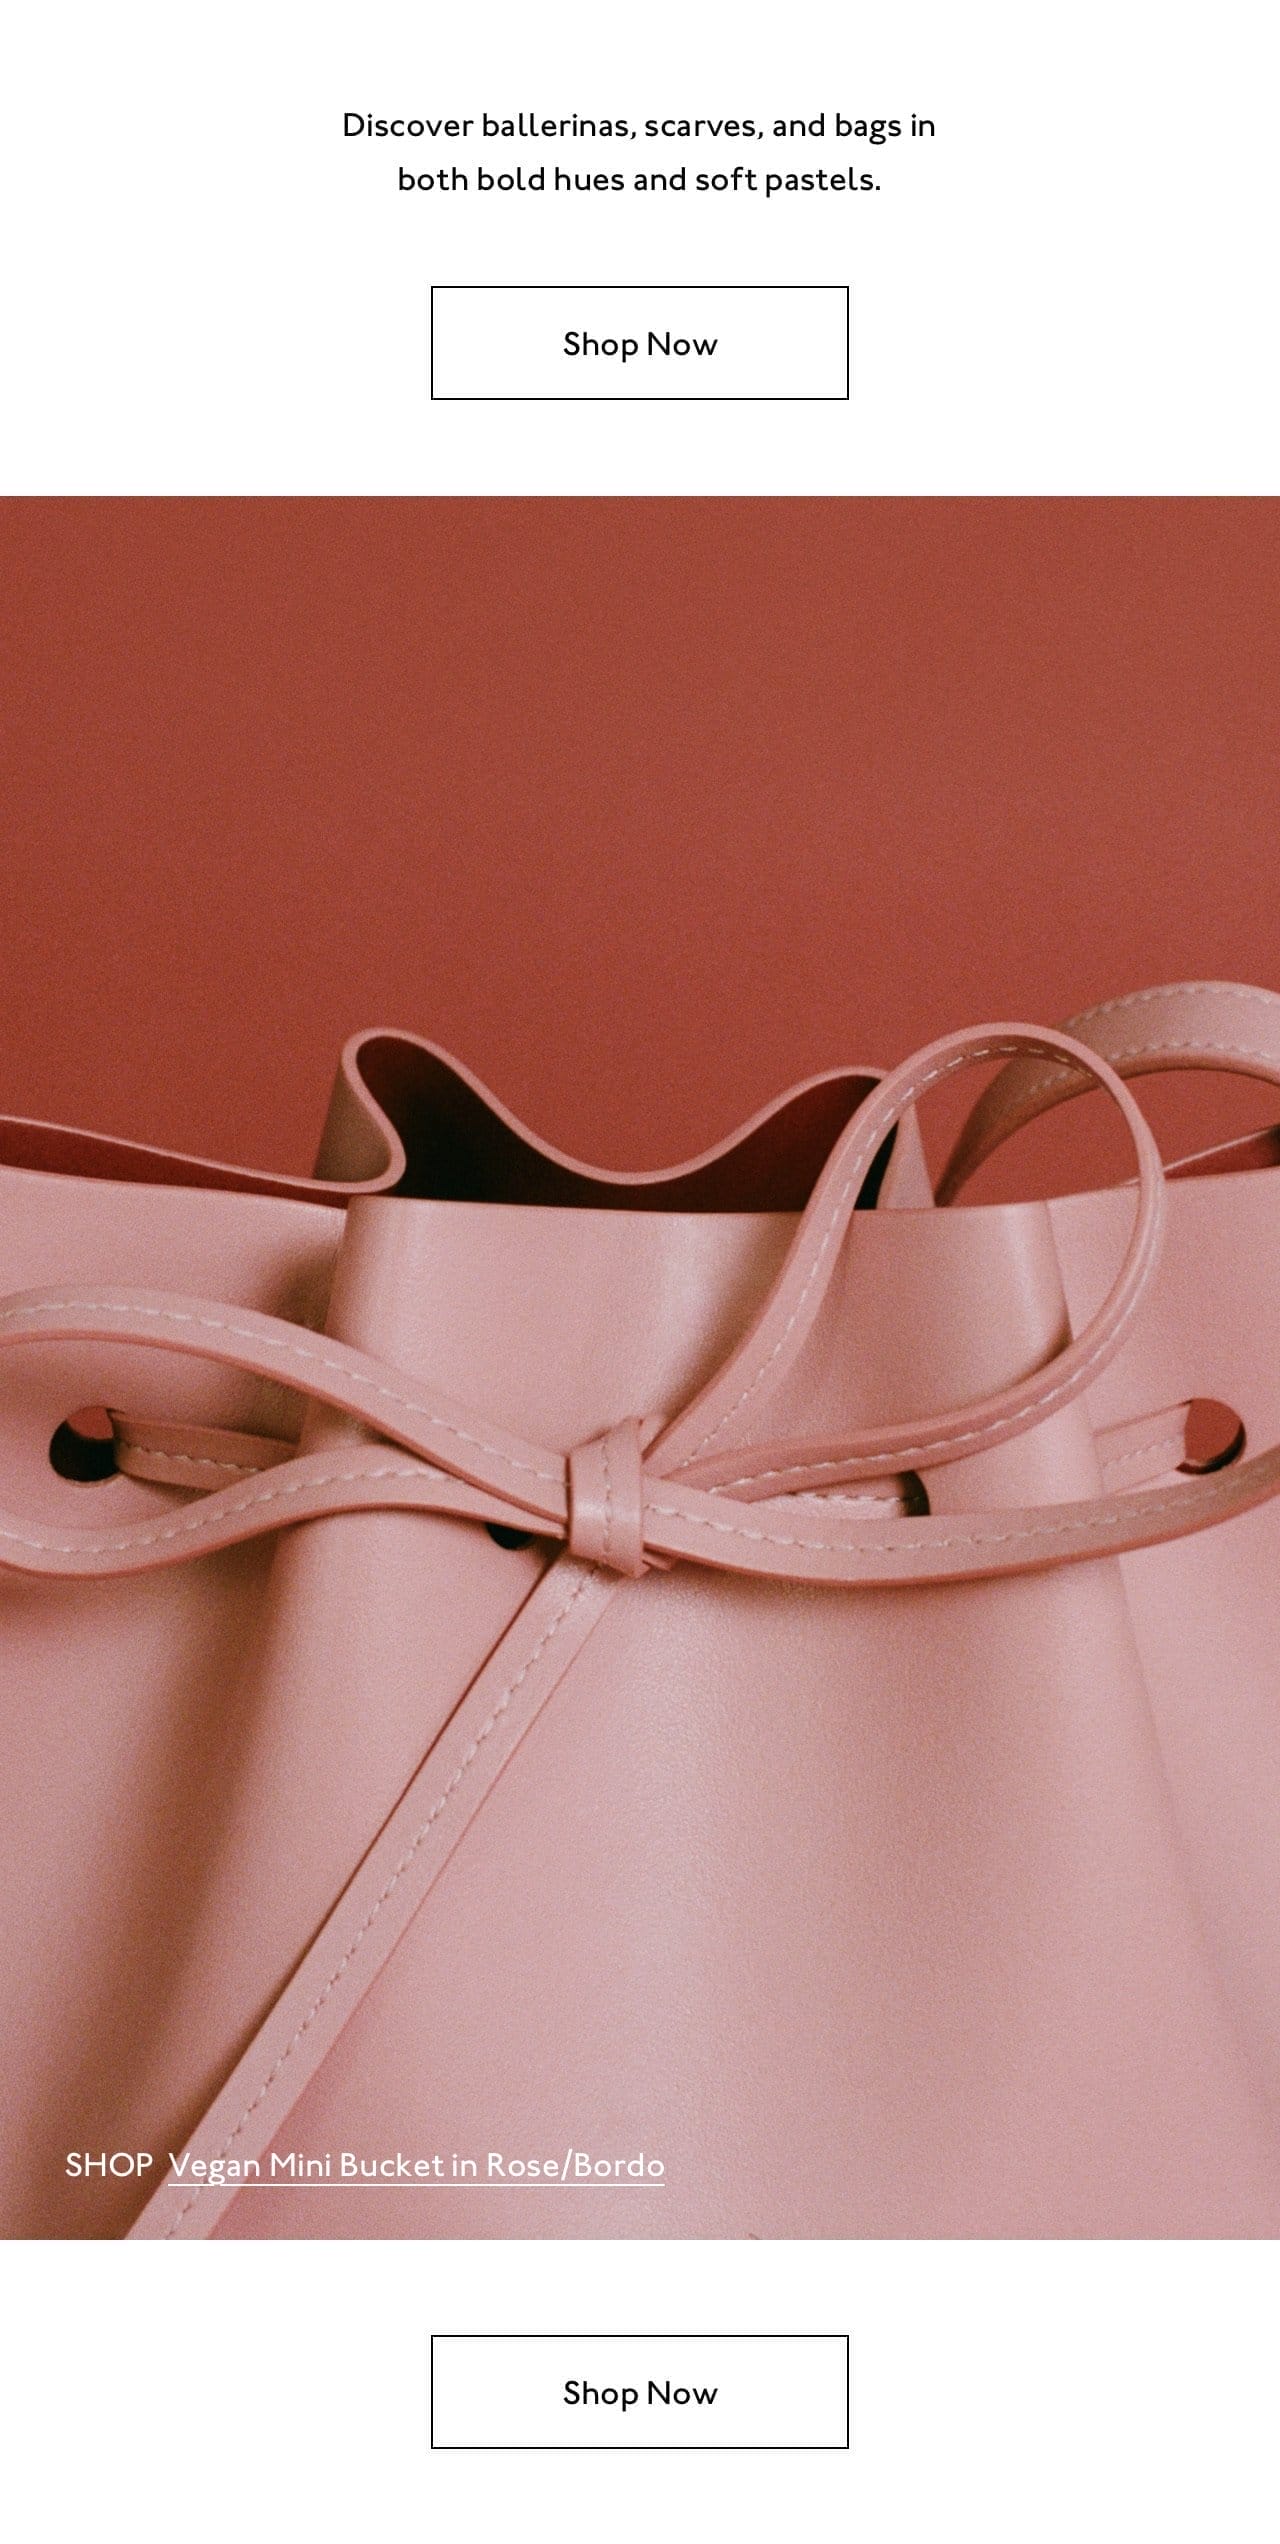 Shop the Vegan Mini Bucket in Rose/Bordo and other pink styles now.